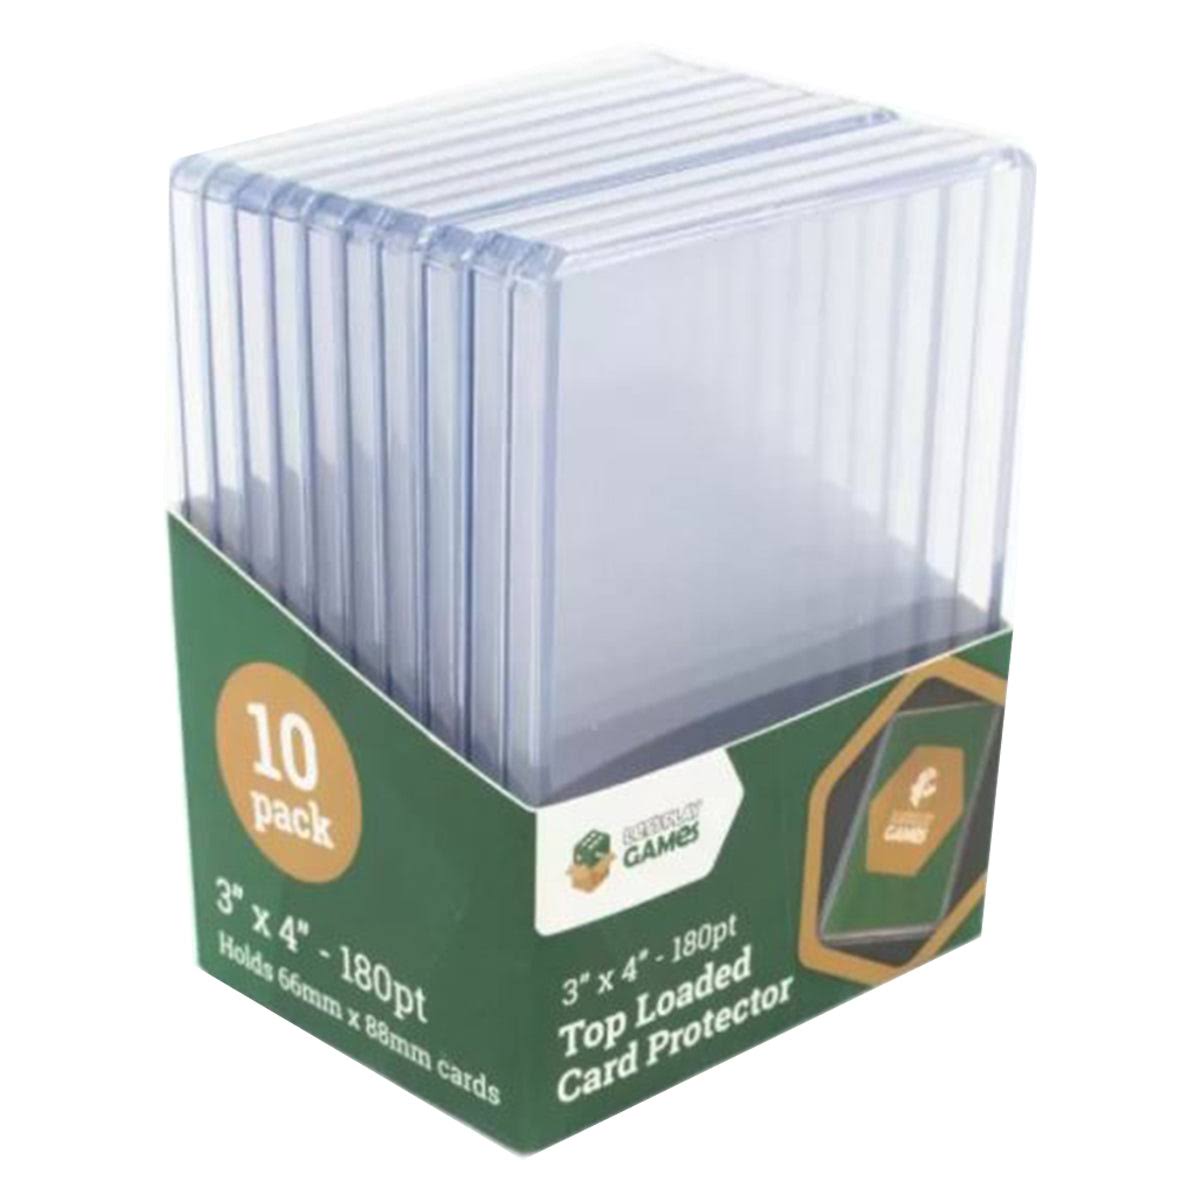 LPG Top Loaded Card Protector 3"x4" 180pt (10) | Ozzie Collectables